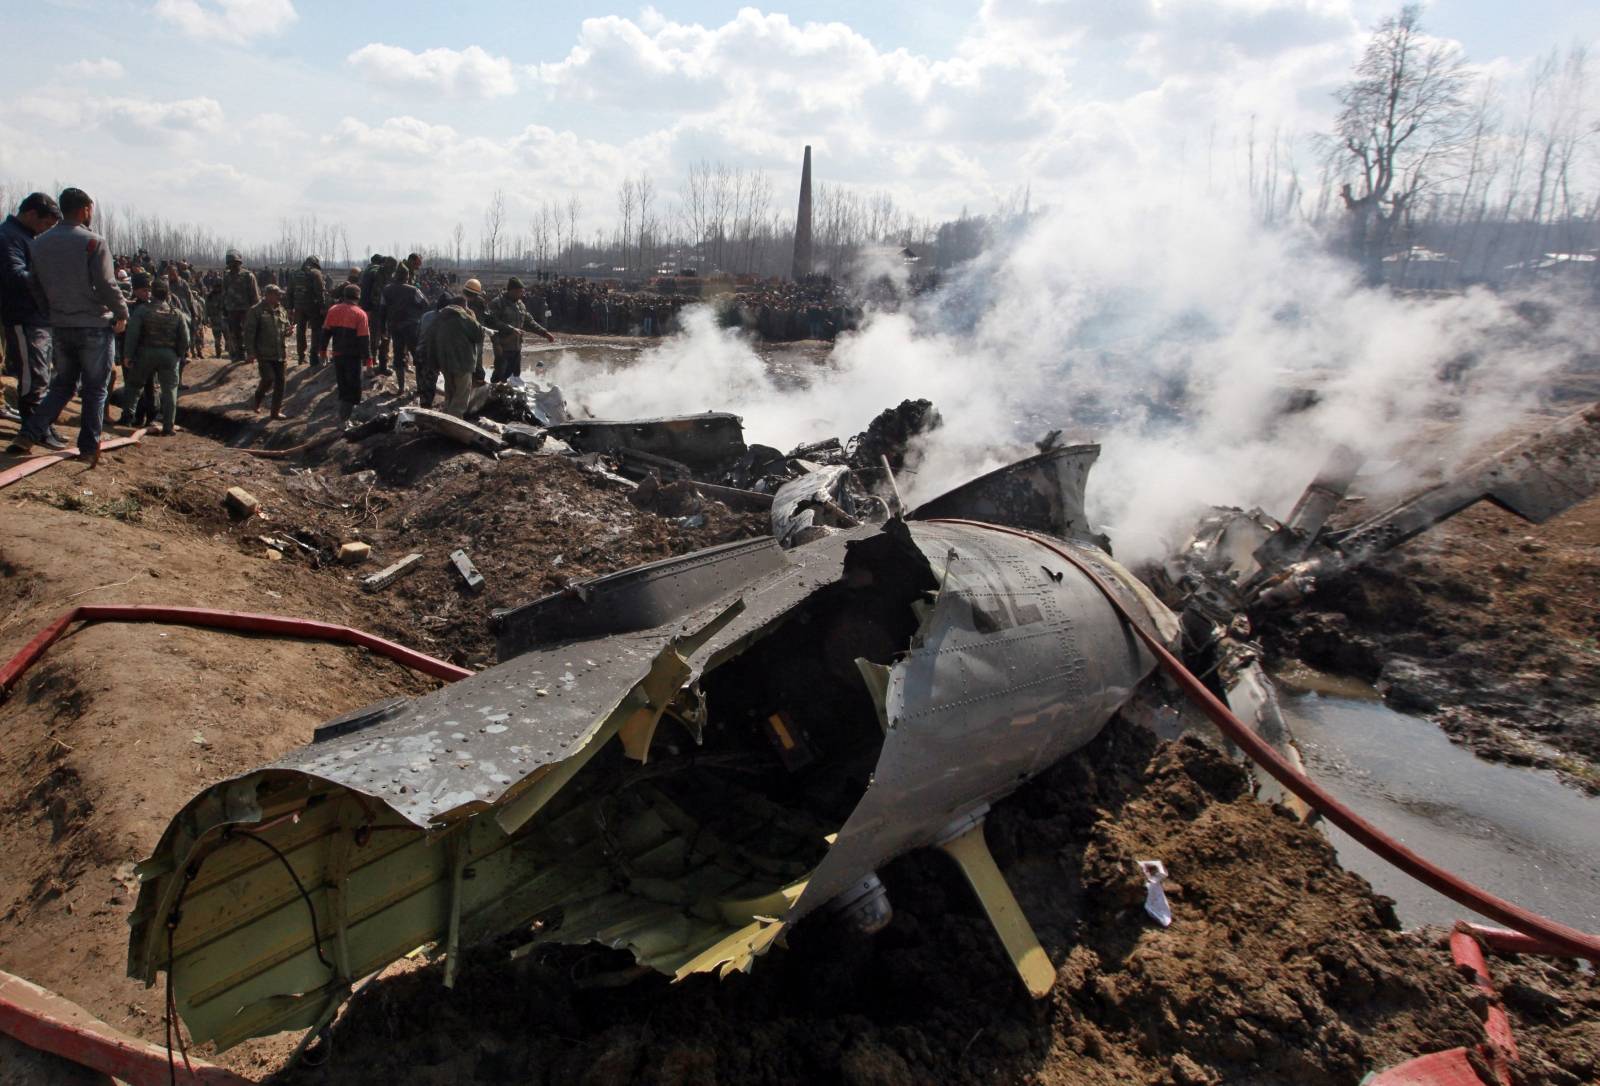 People stand next to the wreckage of Indian Air Force's helicopter after it crashed in Budgam district